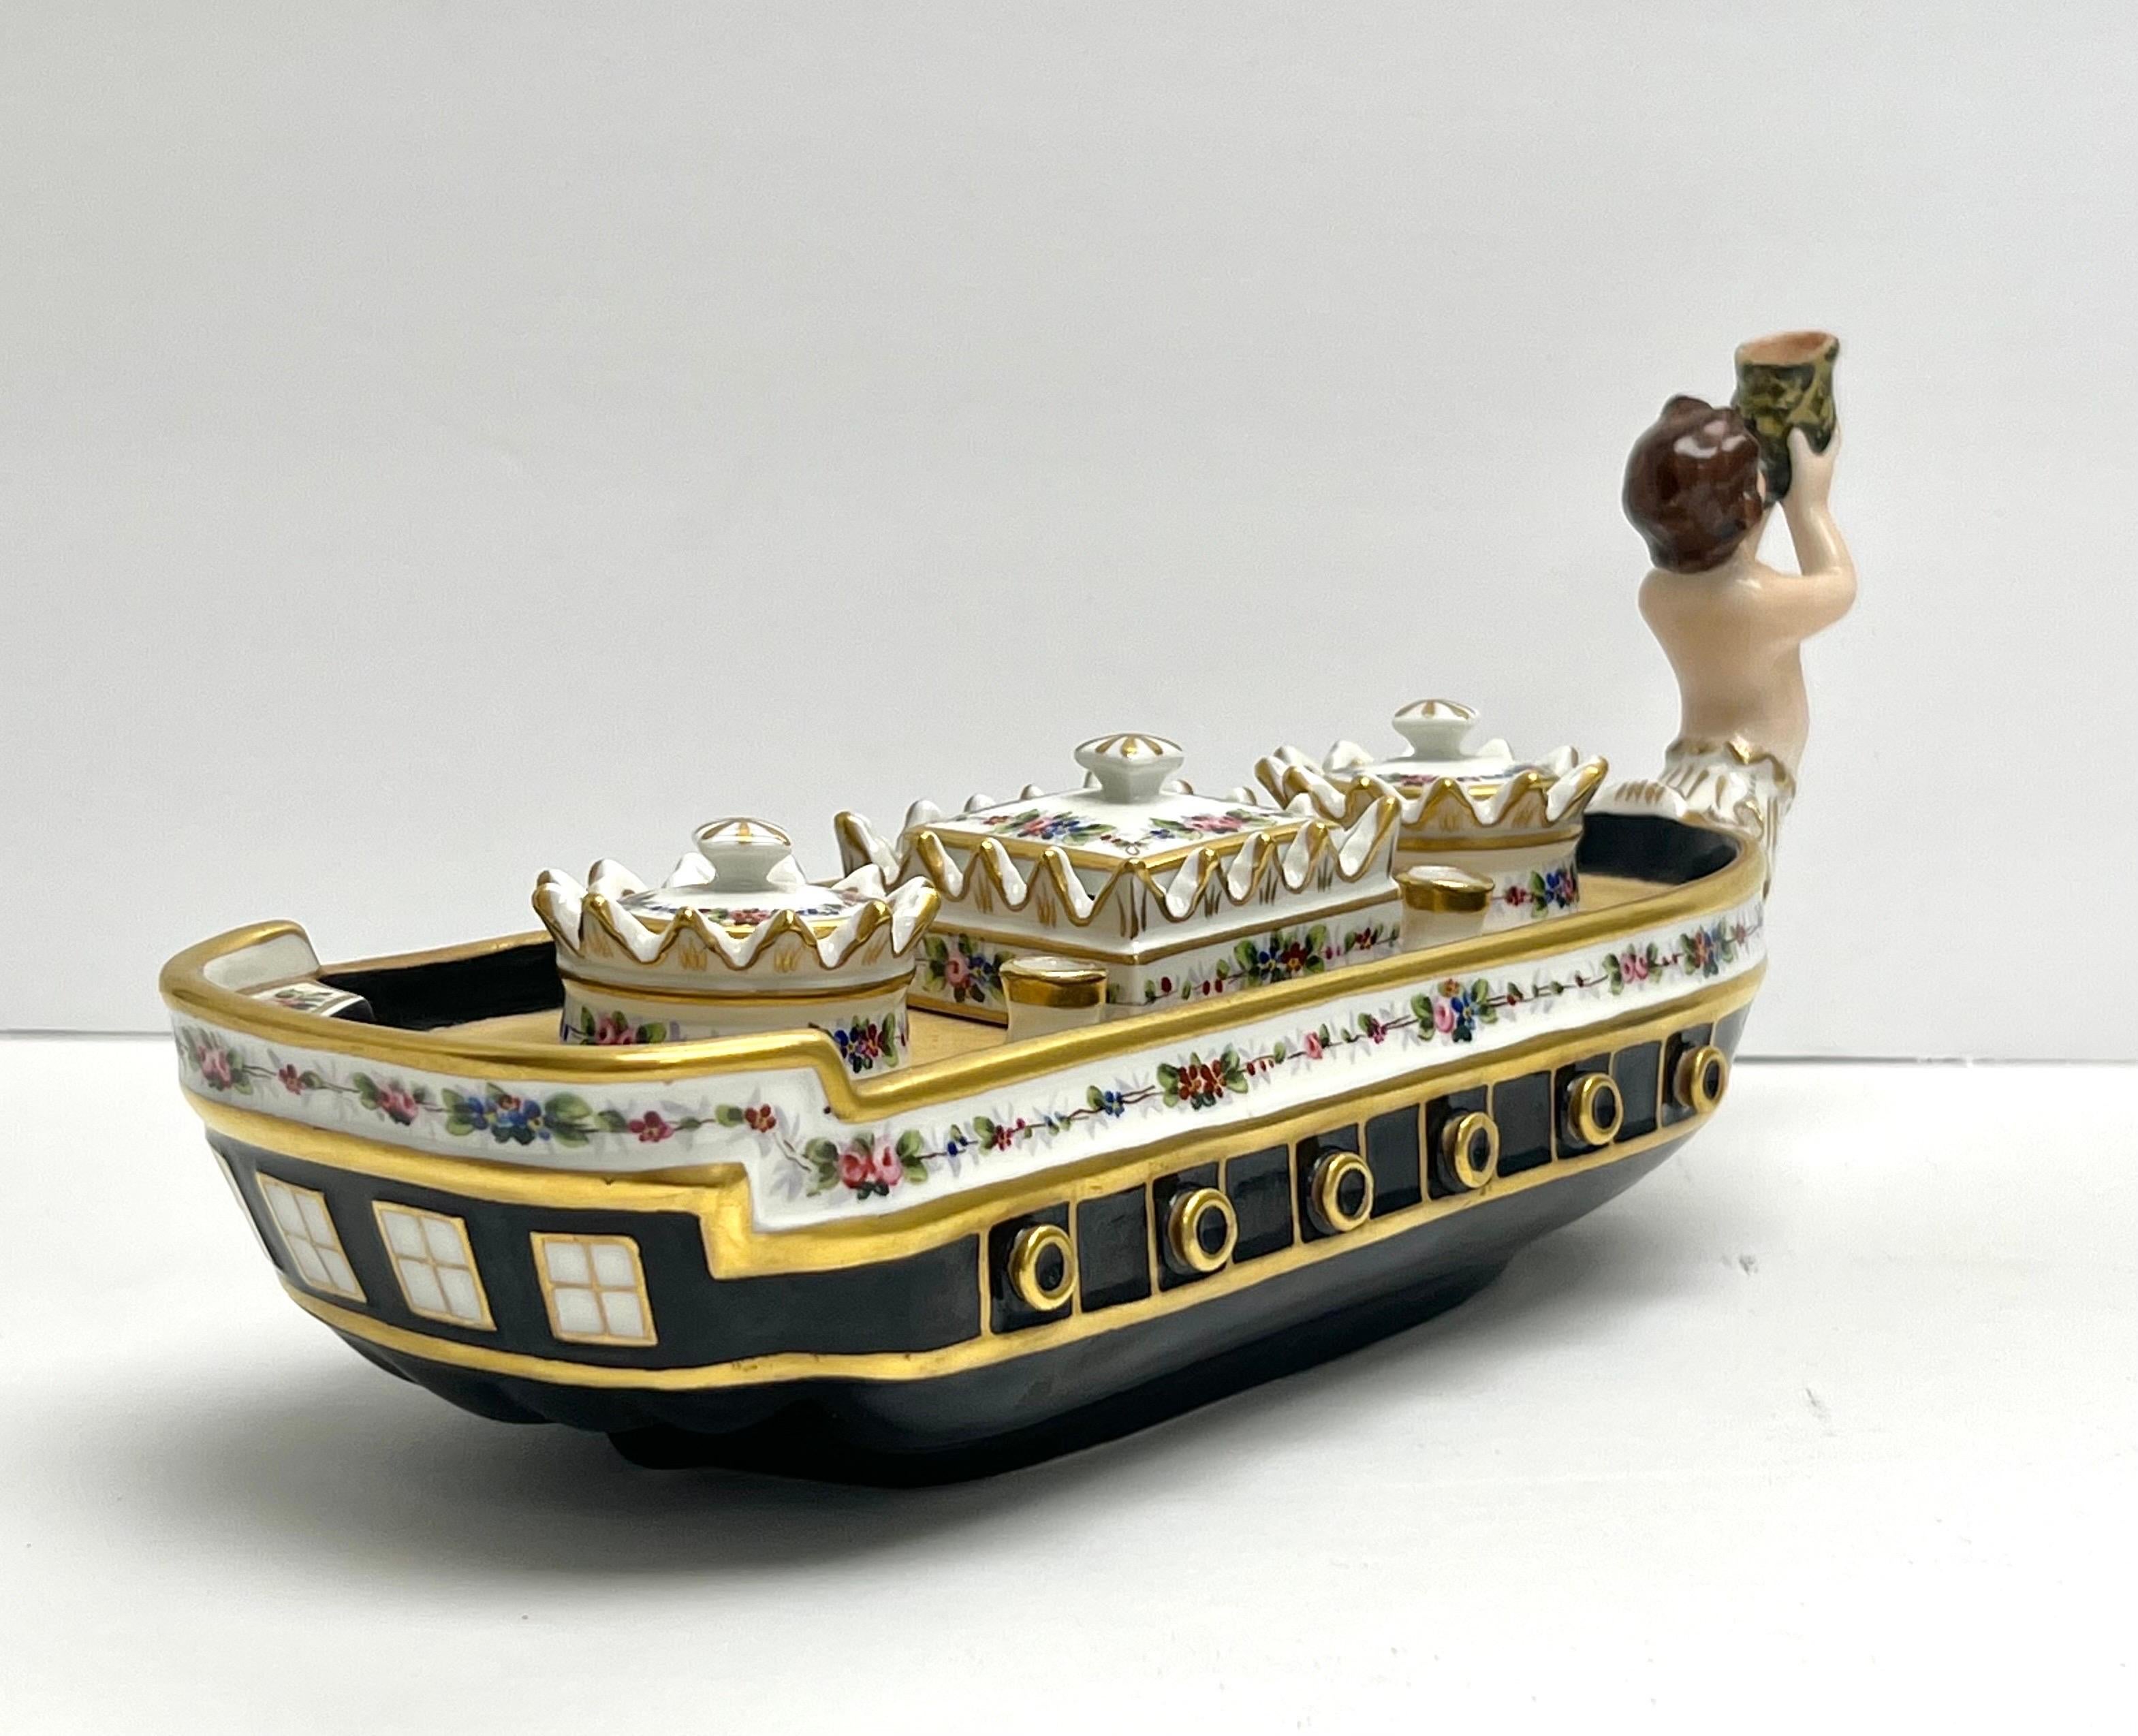 A Vista Alegre Porcelain figurative inkwell. Meticulous detail in the casting and hand painted decoration. Retain all the pieces intact. Circa late 1940s.